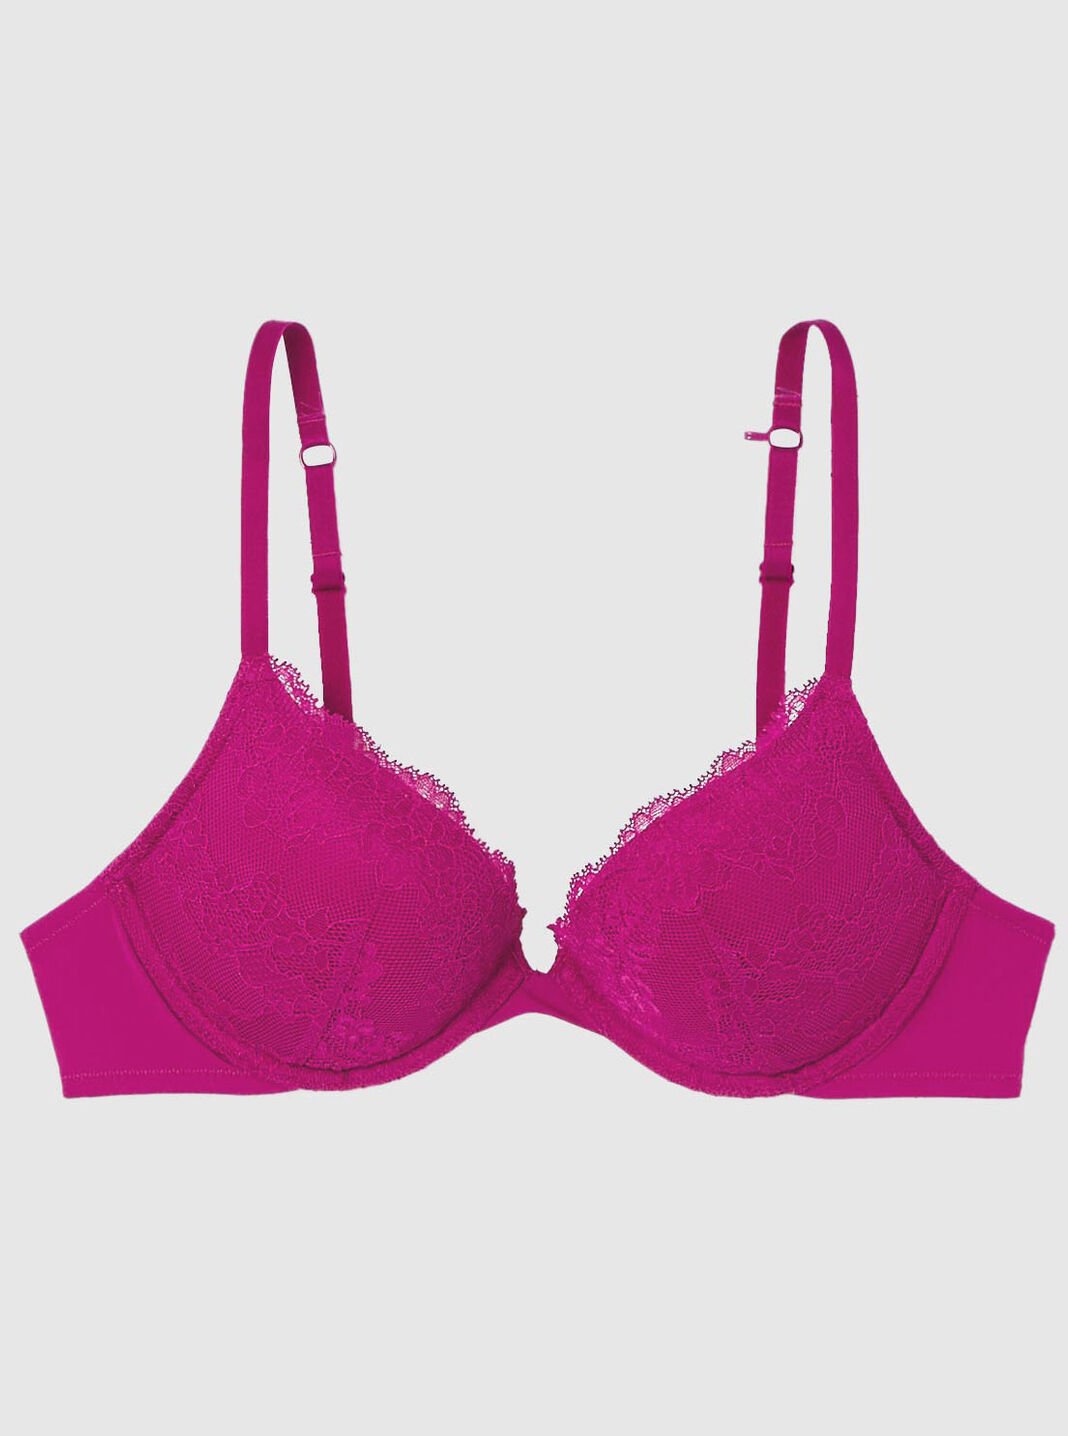 DWXINZA Push Up Bras for Women Bralette Plunge Yoga India